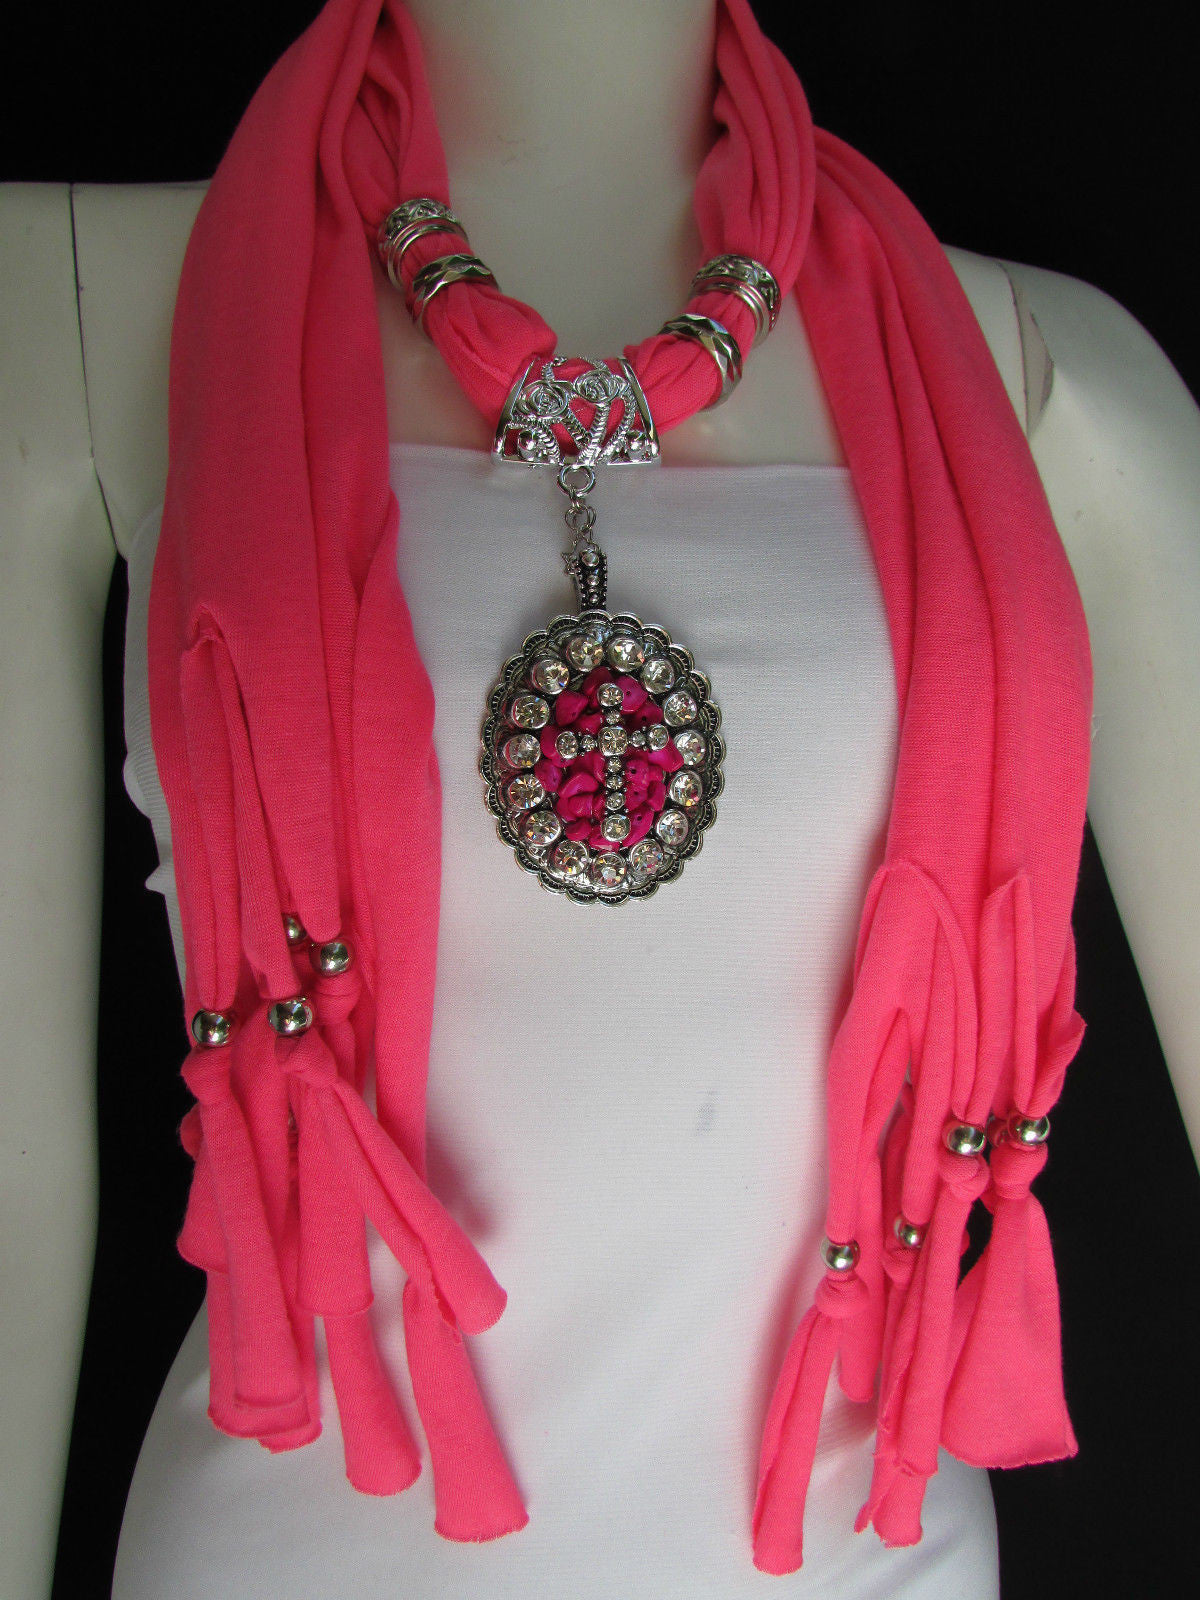 Blue Pink Beads Fabric Scarf Long Necklace Rhinestones Cross Pendant Women Fashion - alwaystyle4you - 13